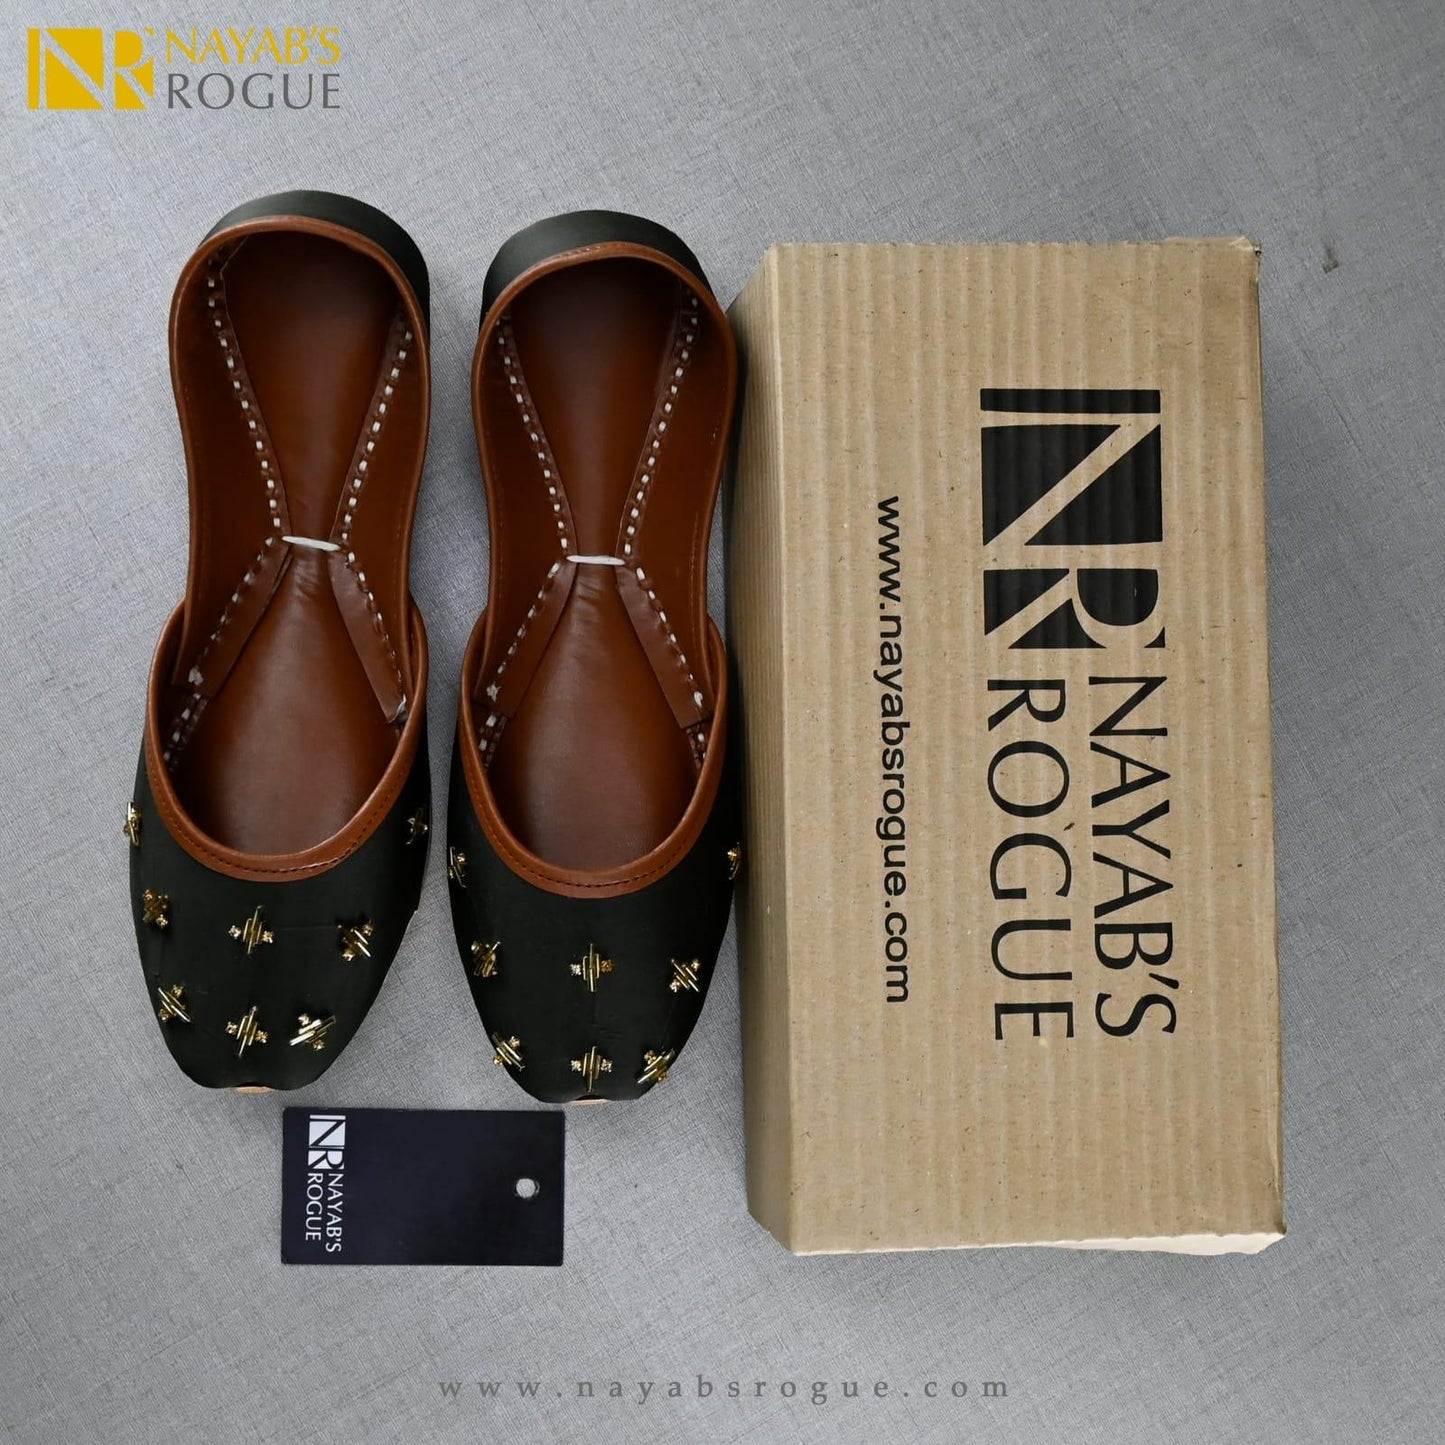 Luxury Embroidered Khussa - Nayab's Rogue